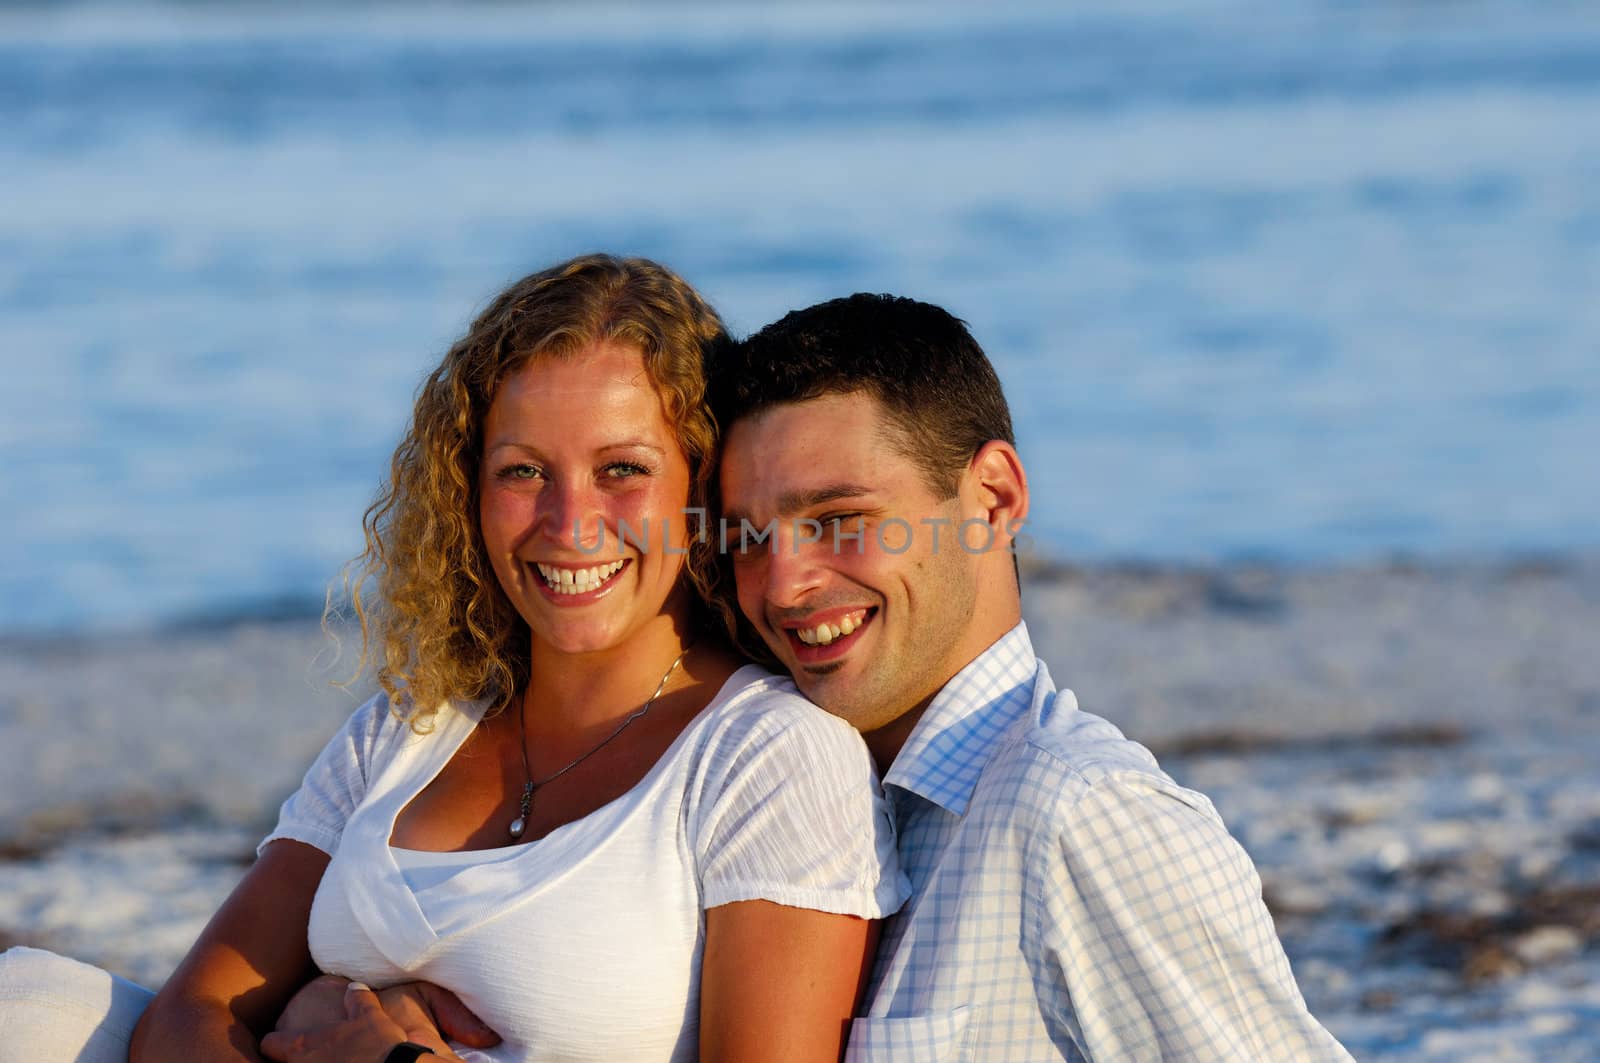 A sweet young couple is sitting together on beach.